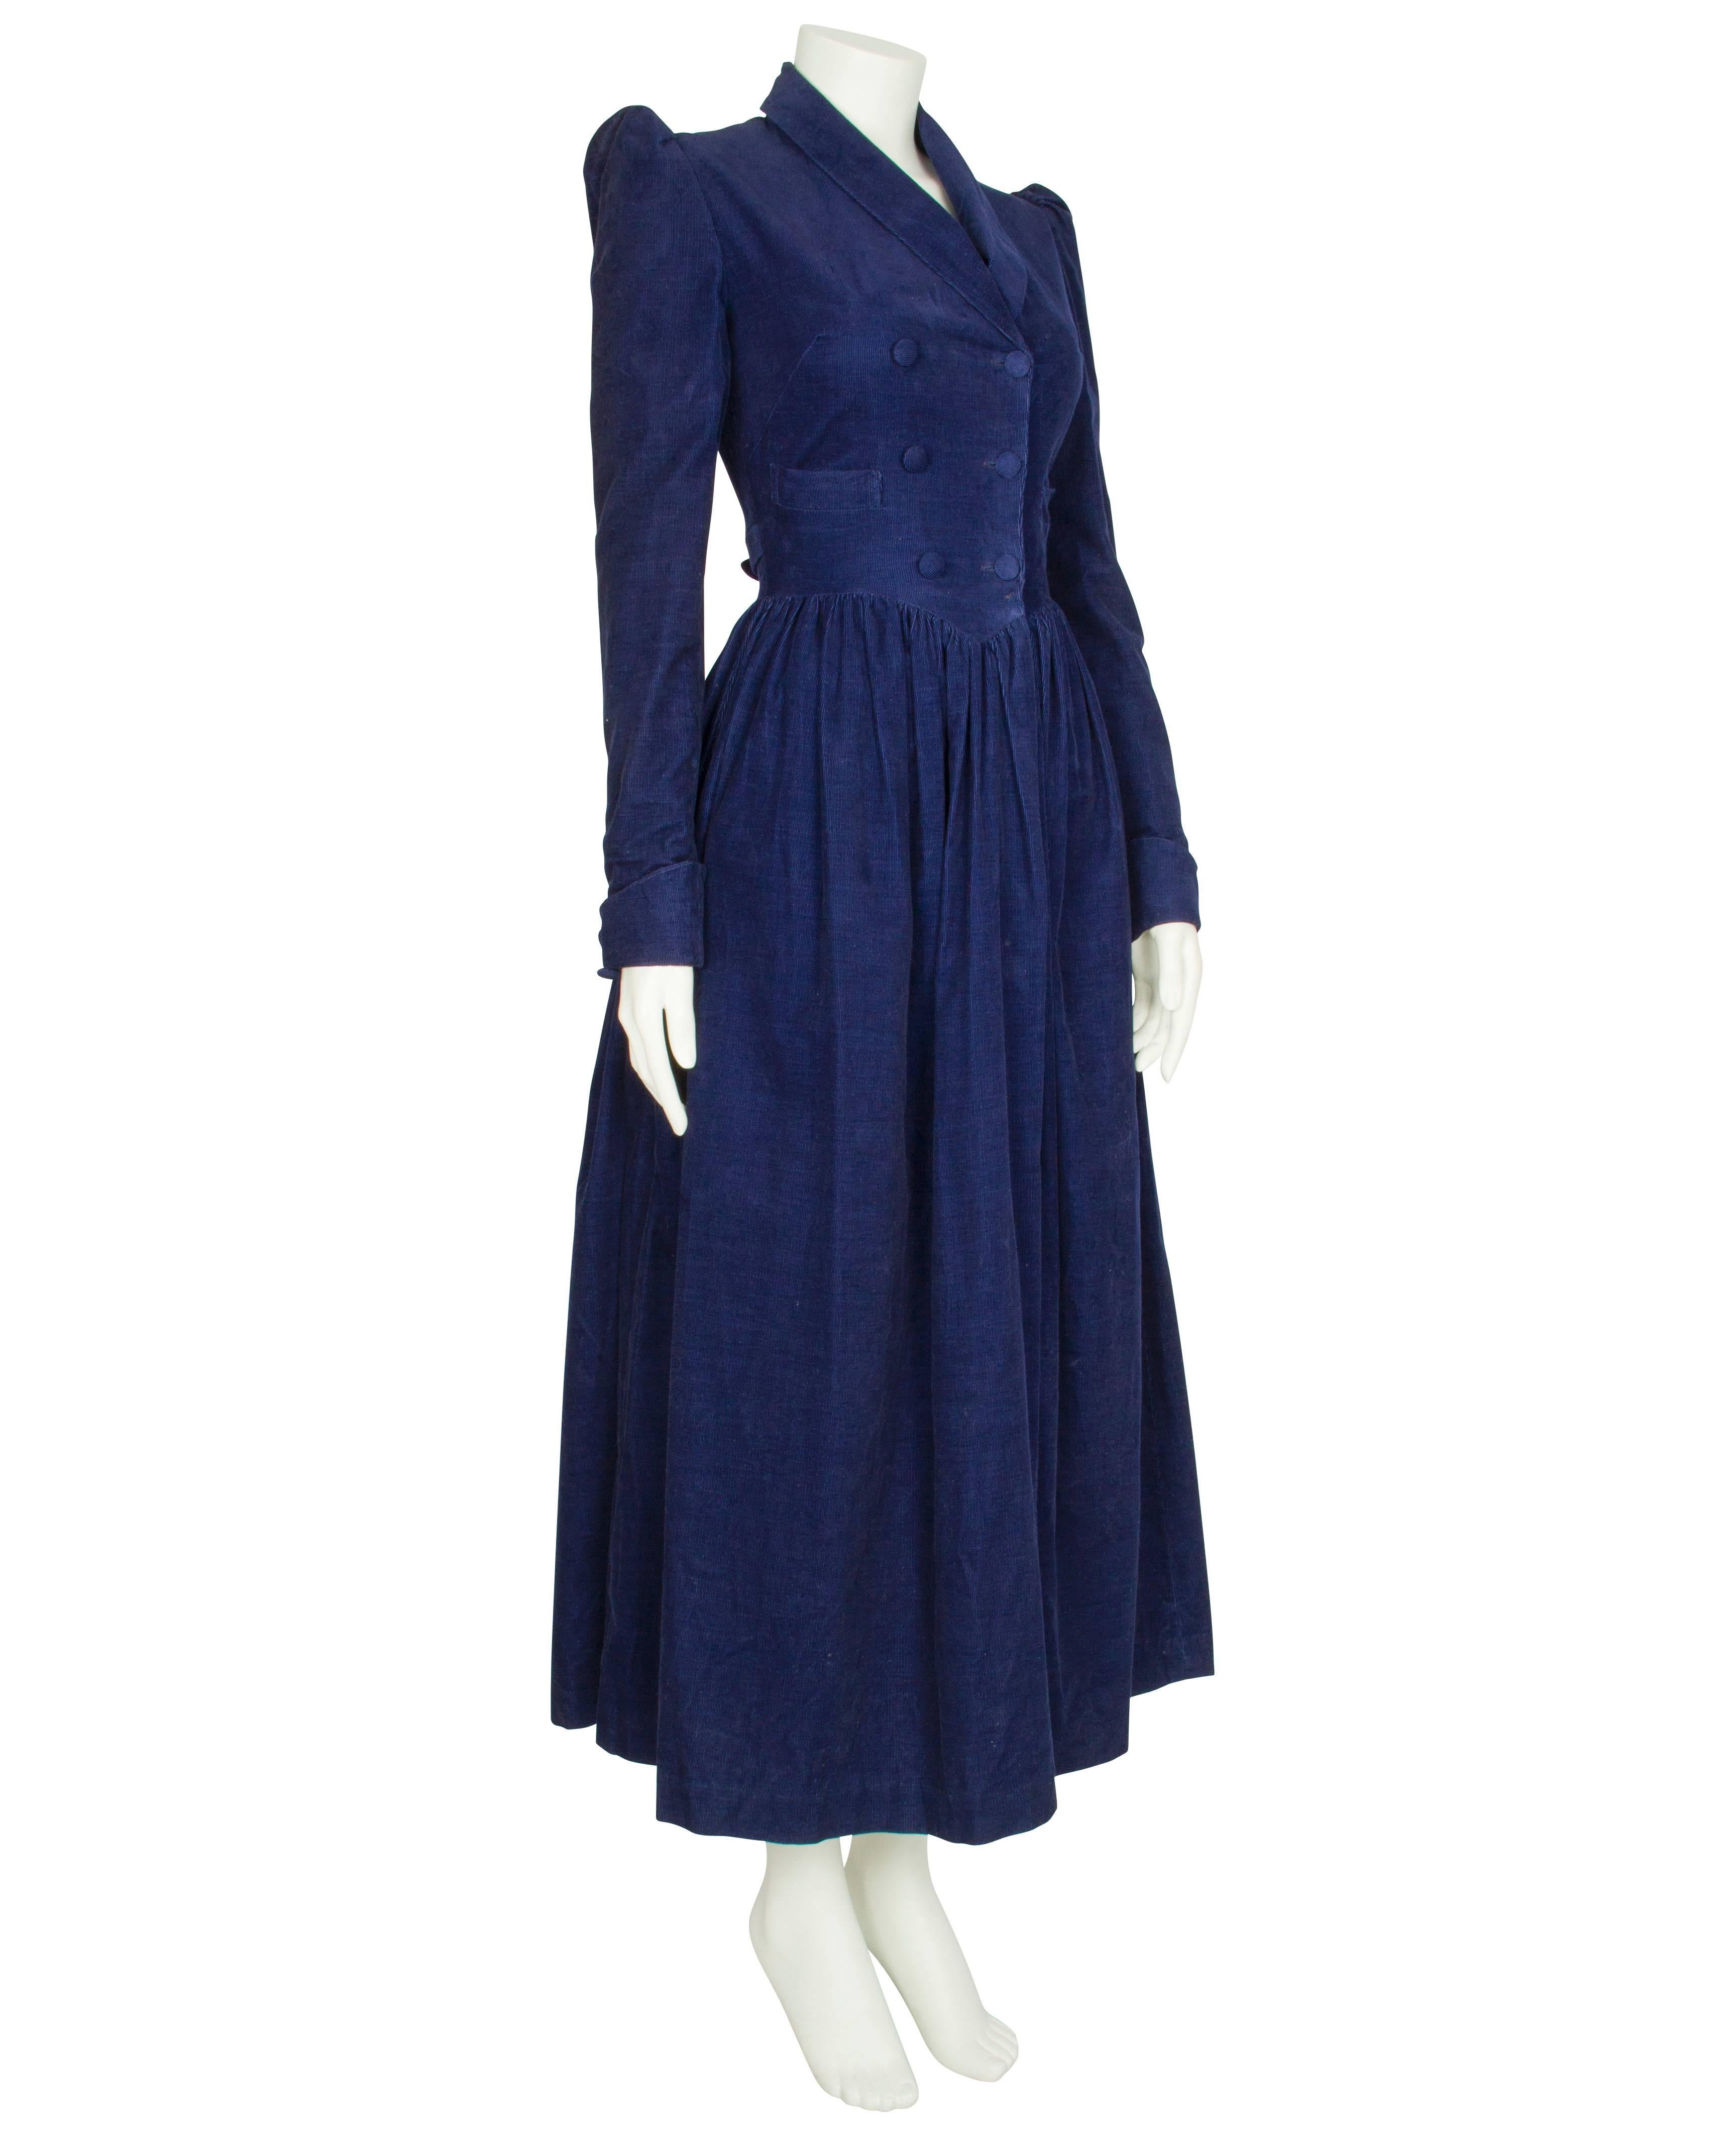 An incredibly feminine 1970s cotton corduroy dress by label Pollen London. The dress features a double breasted bodice with puffed sleeves and a mock-French cuff, which rolls up with two decorative buttons. The skirt gathers from the pointed waist,